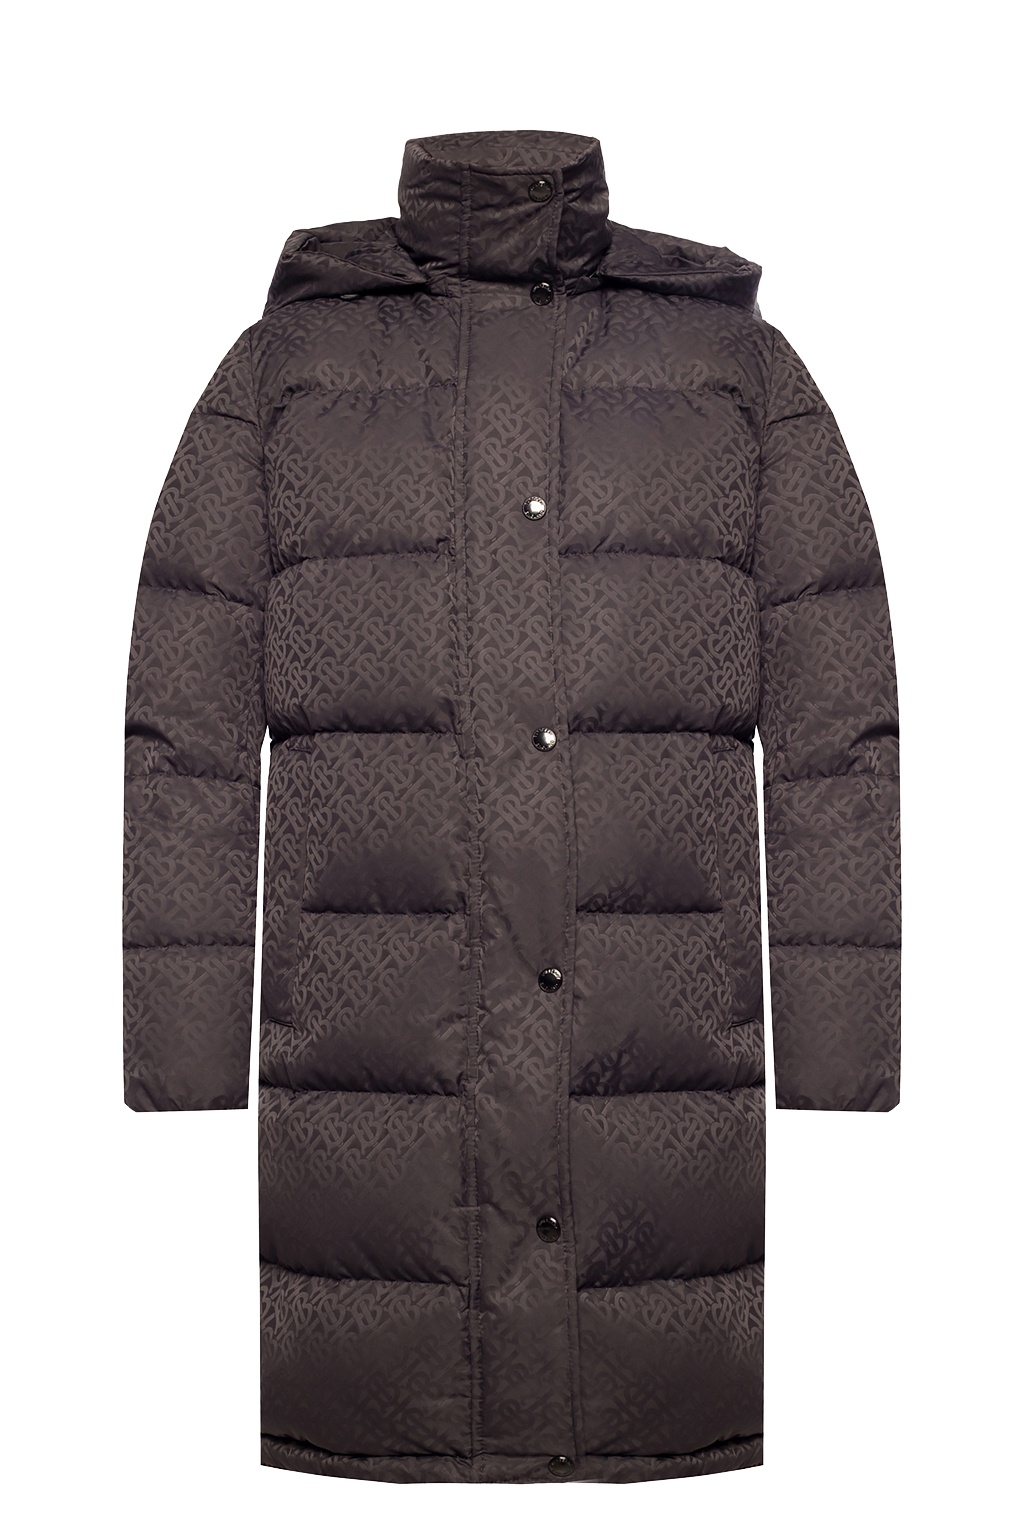 burberry quilted parka